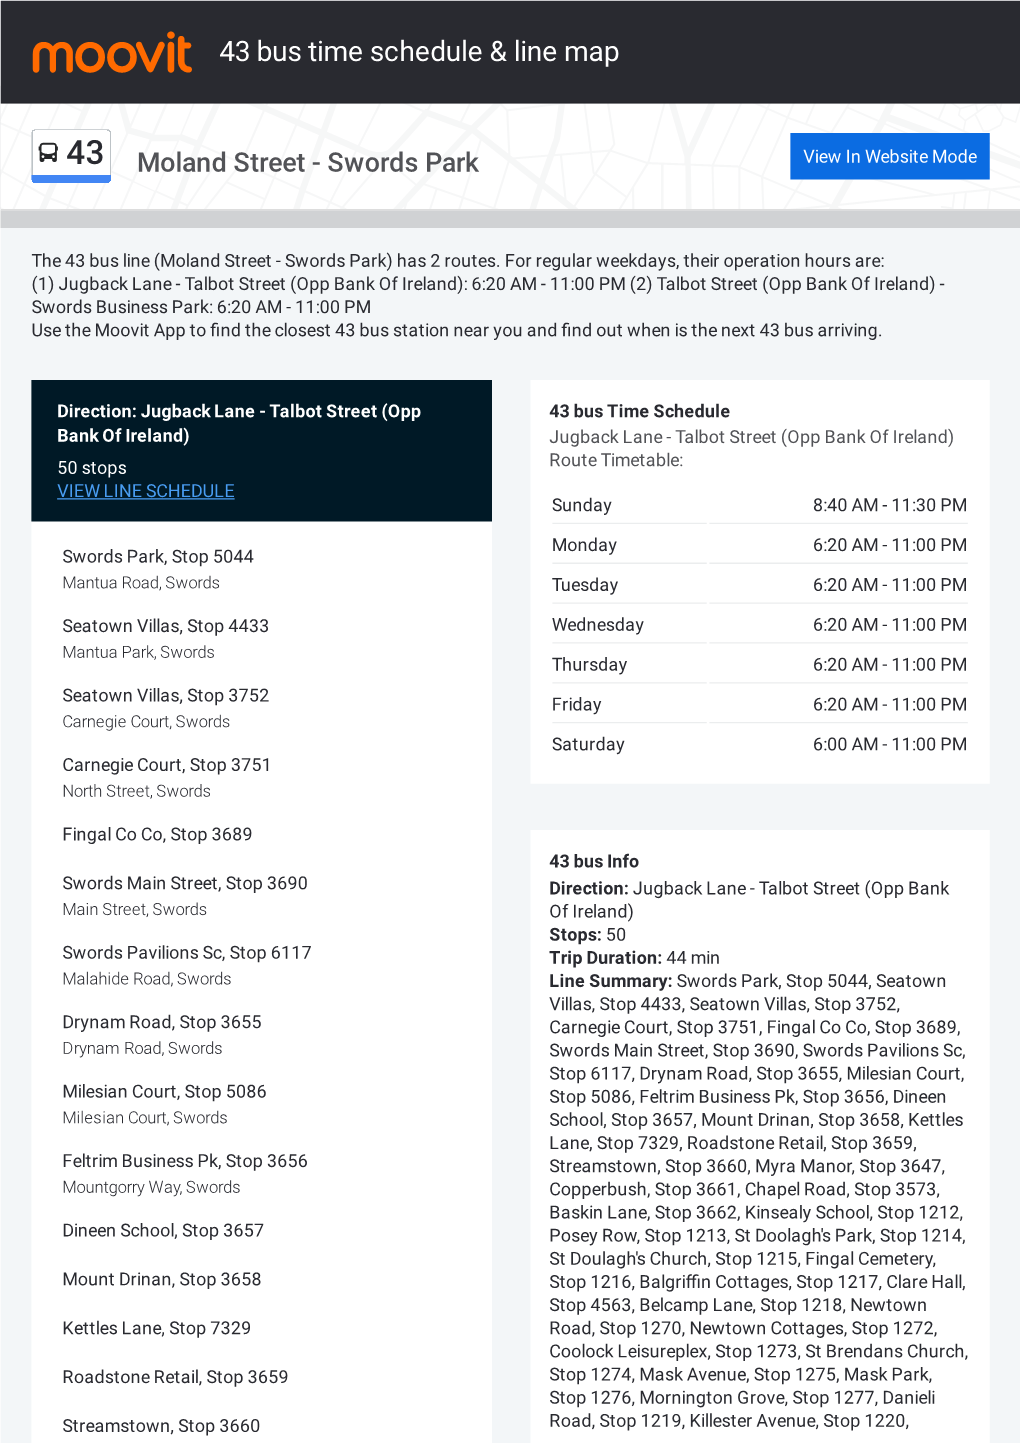 43 Bus Time Schedule & Line Route